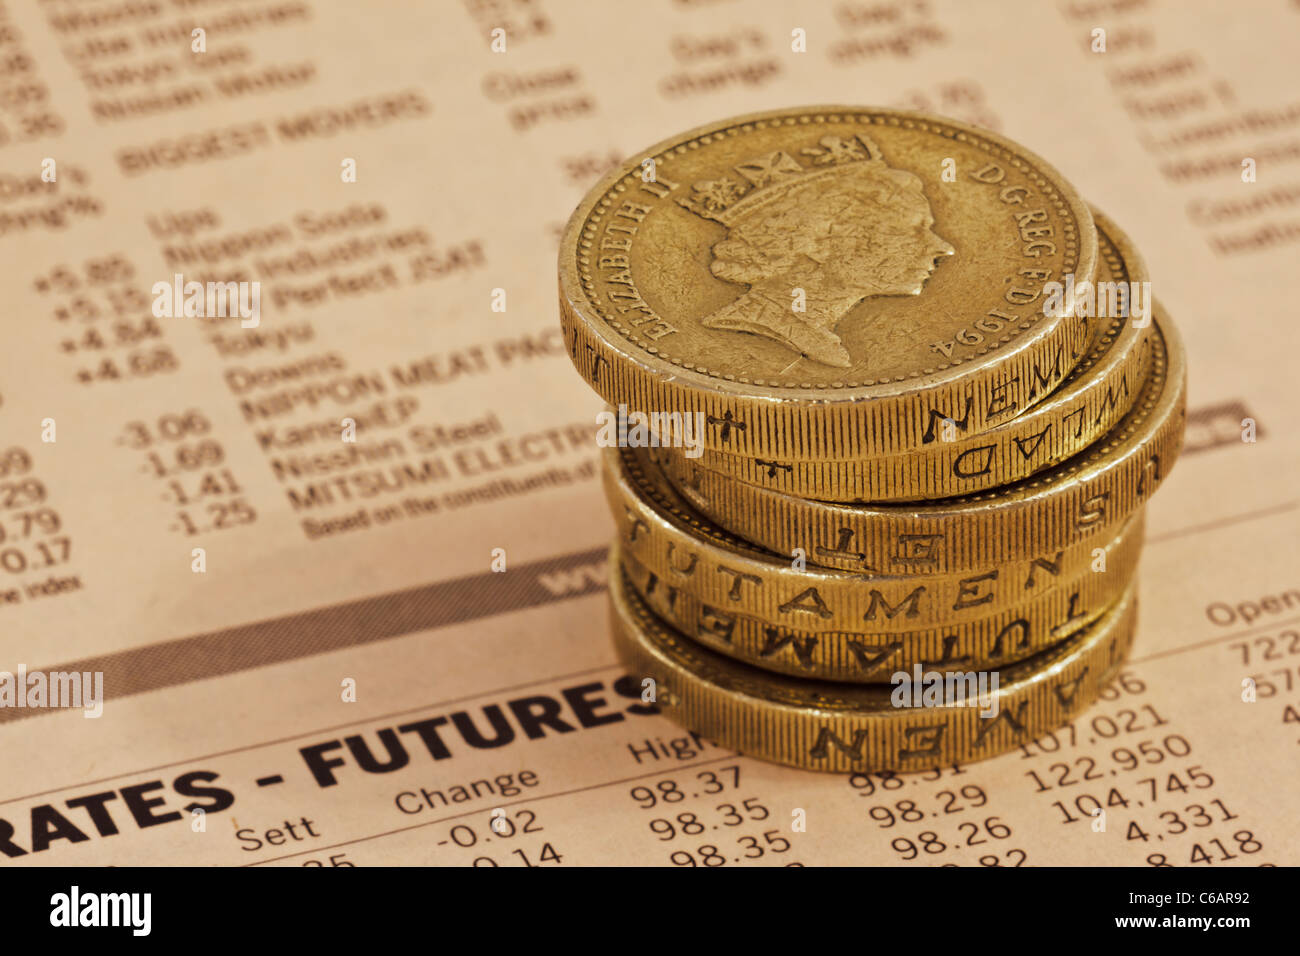 Stack of UK pound coins Stock Photo